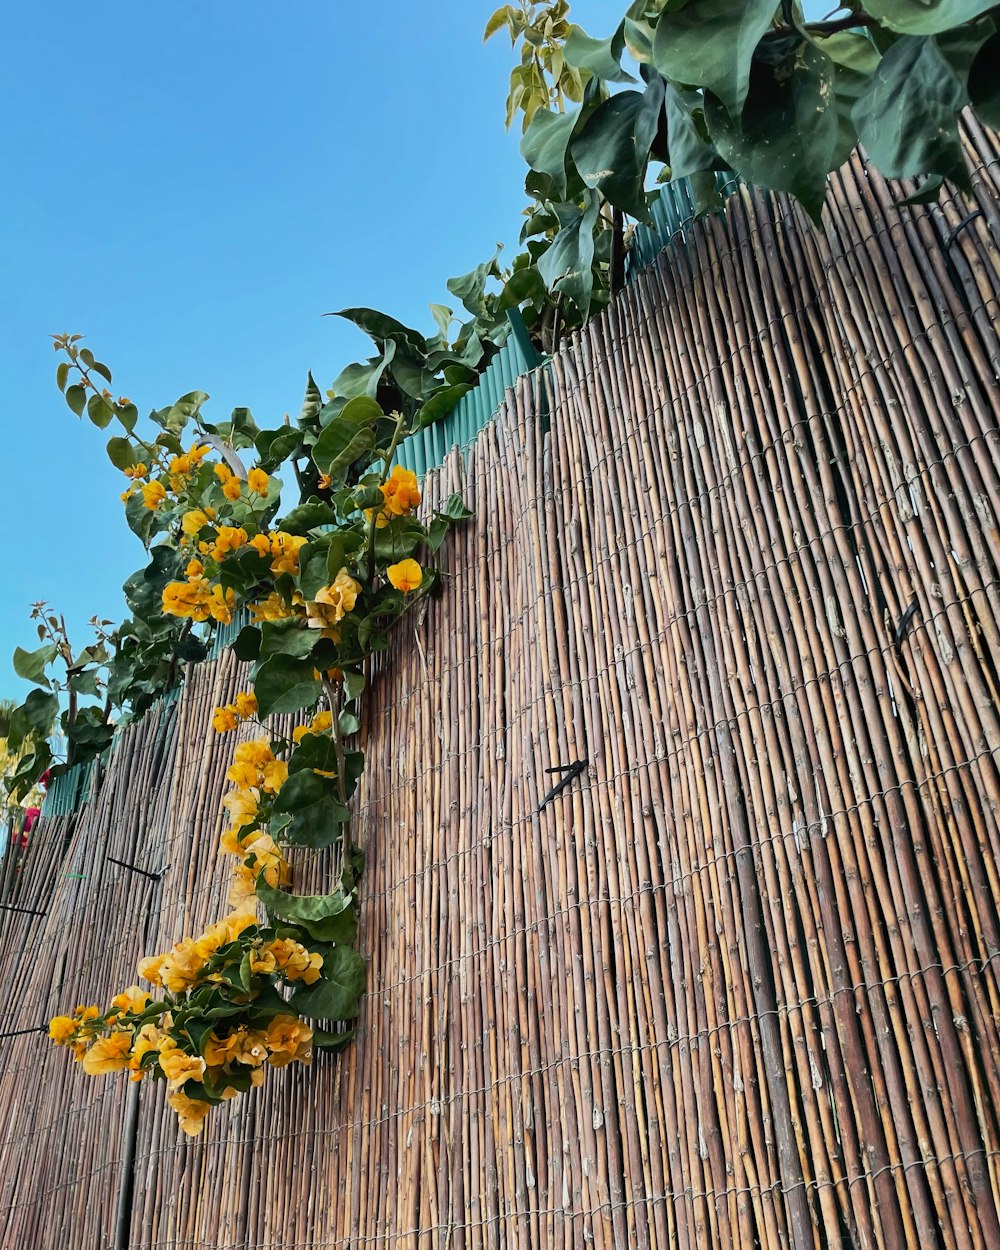 a bamboo fence with flowers growing on it